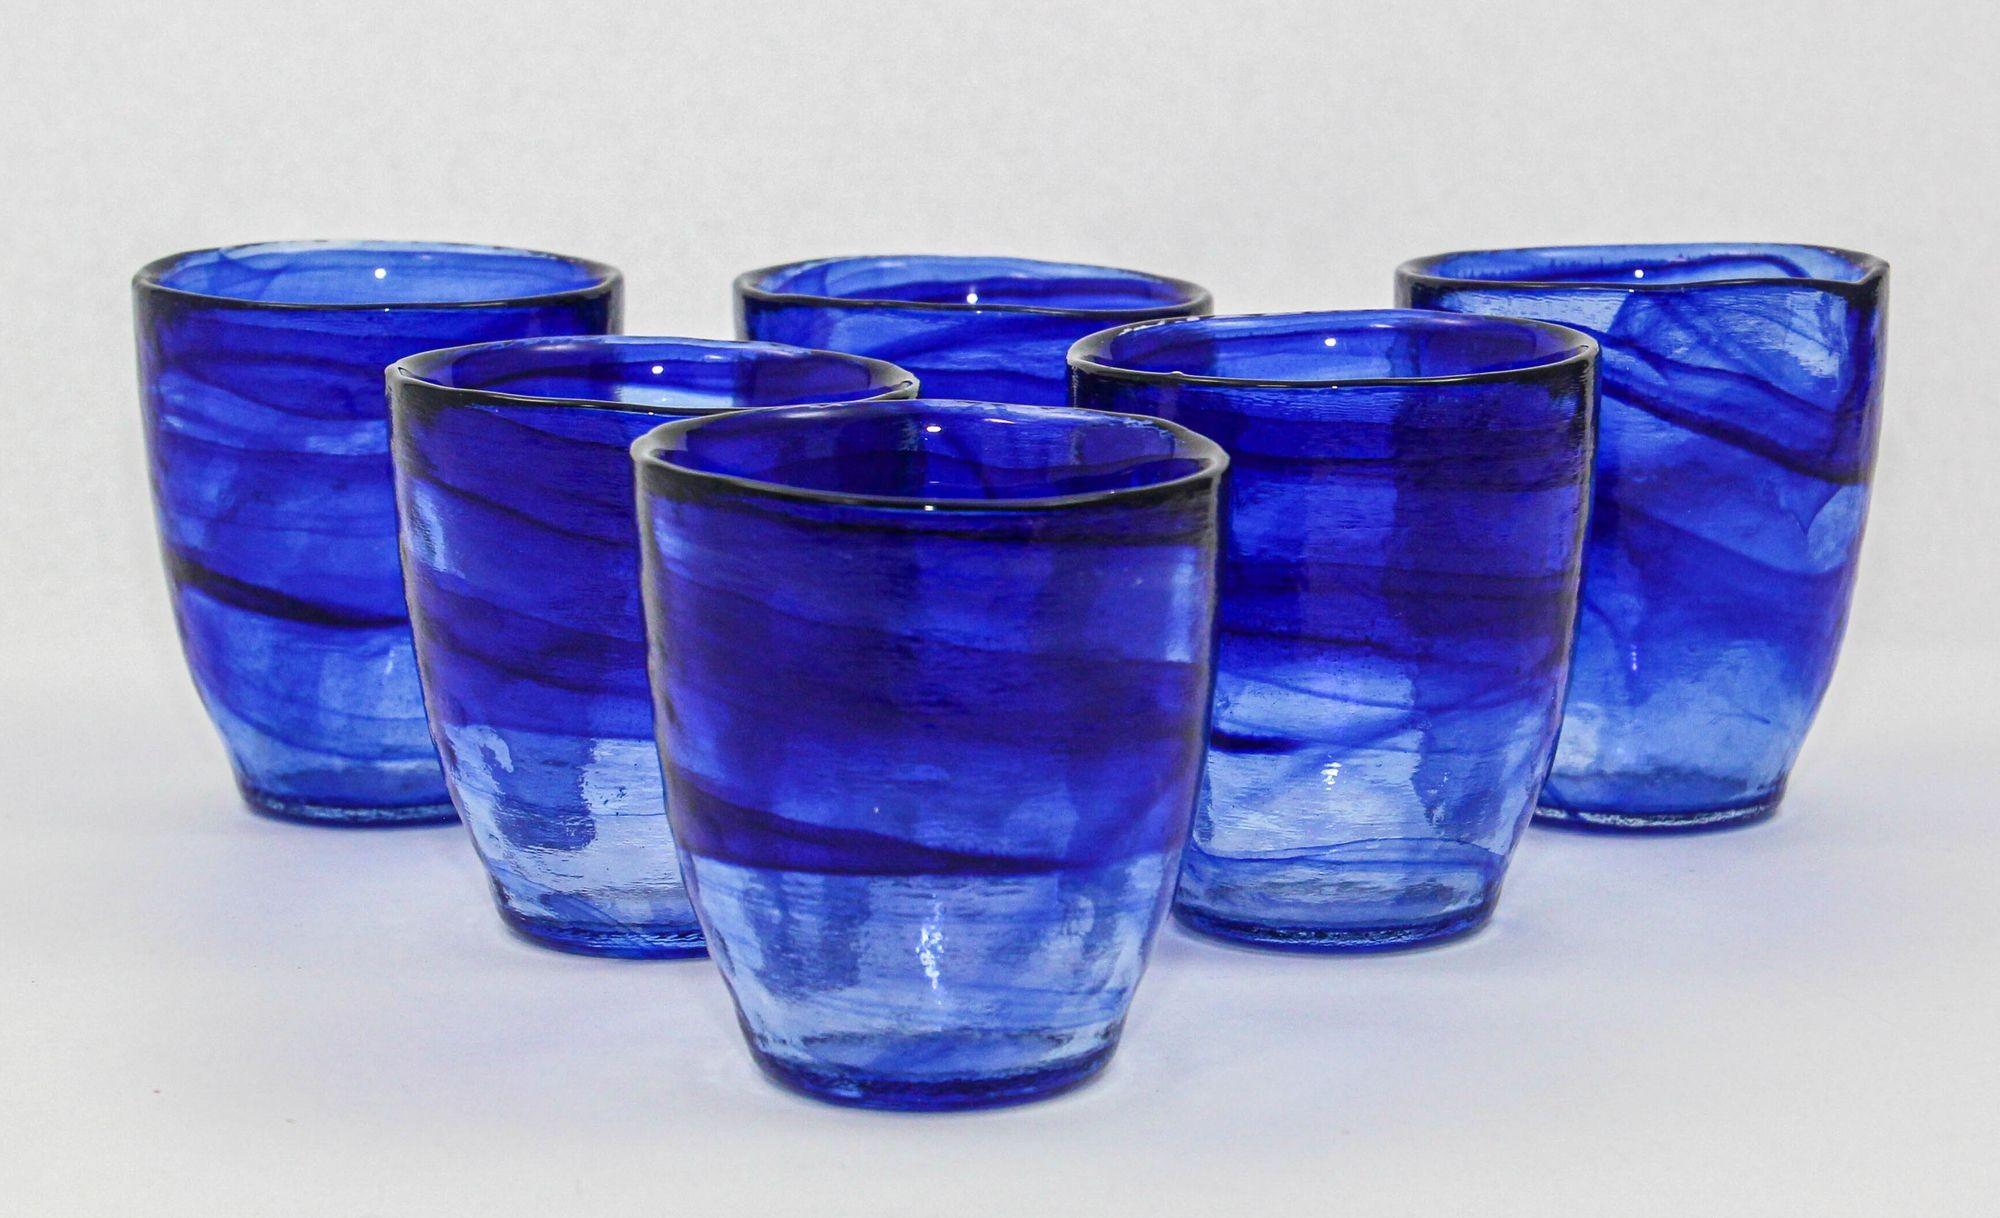 Handcrafted Swirl-Infused Old-Fashioned Glasses in Cobalt Blue – Set of 6.
These vintage Italian hand-blown glasses boast a thick and heavy construction in captivating cobalt blue and clear glass with intricate swirls.
Elevate your barware